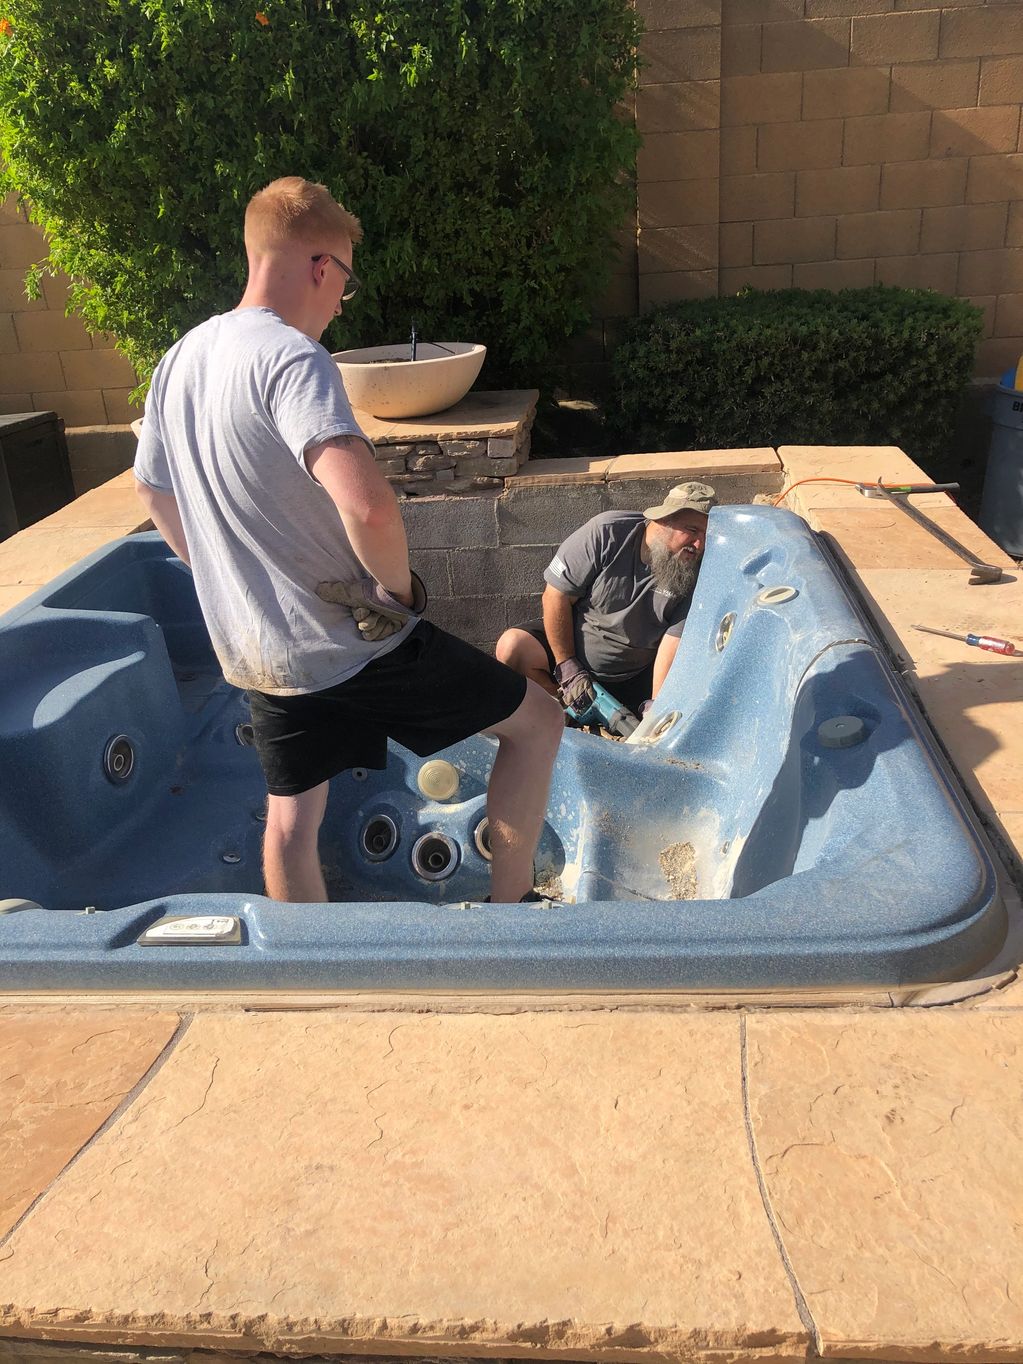 Cutting hot tub for disposal.
Spa removal
Spa move
Hot tub move
Jacuzzi removal